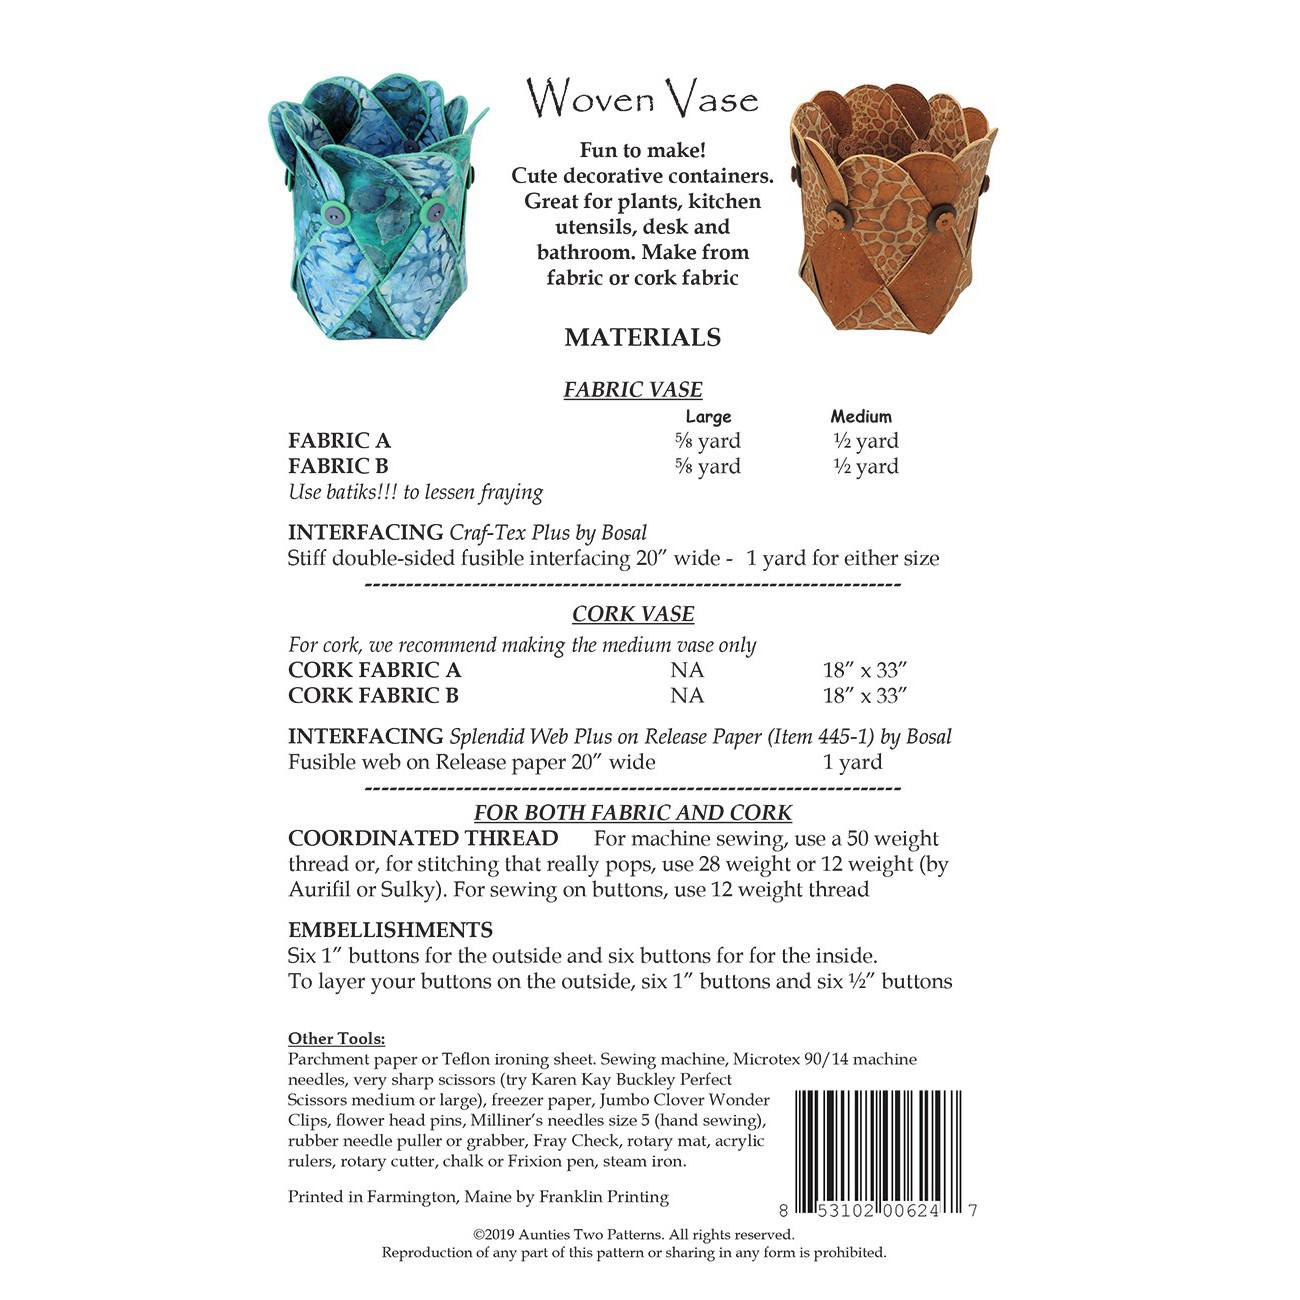 Woven Vase Pattern - Aunties Two image # 52597